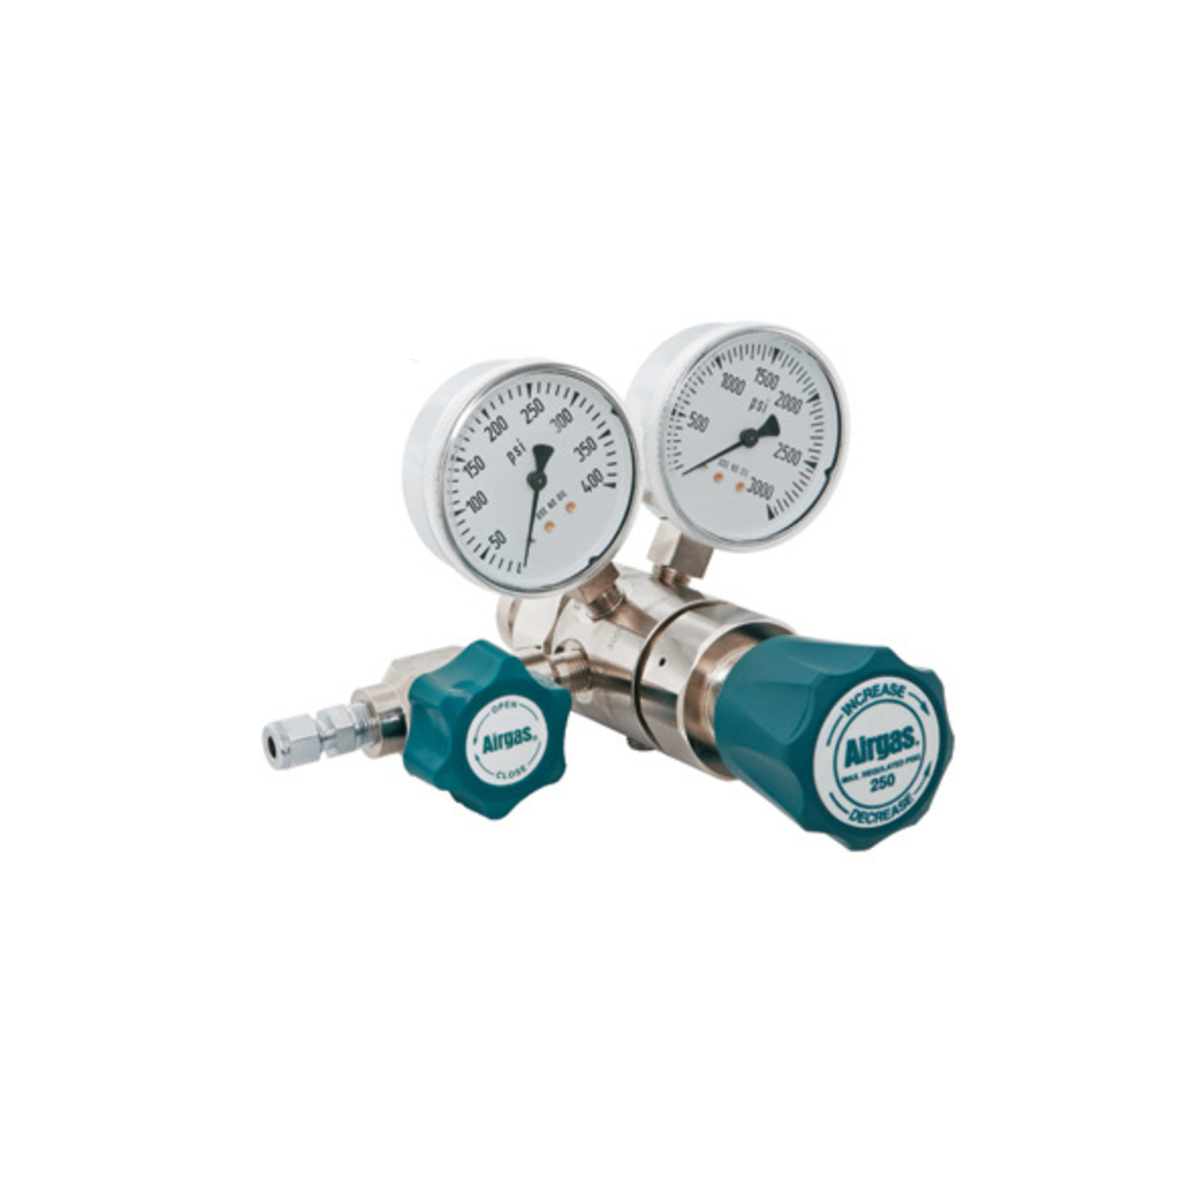 Airgas Model C645D590 Stainless Steel High Purity Two Stage Pressure Regulator With 1/4" FNPT Connection And Threaded Seat